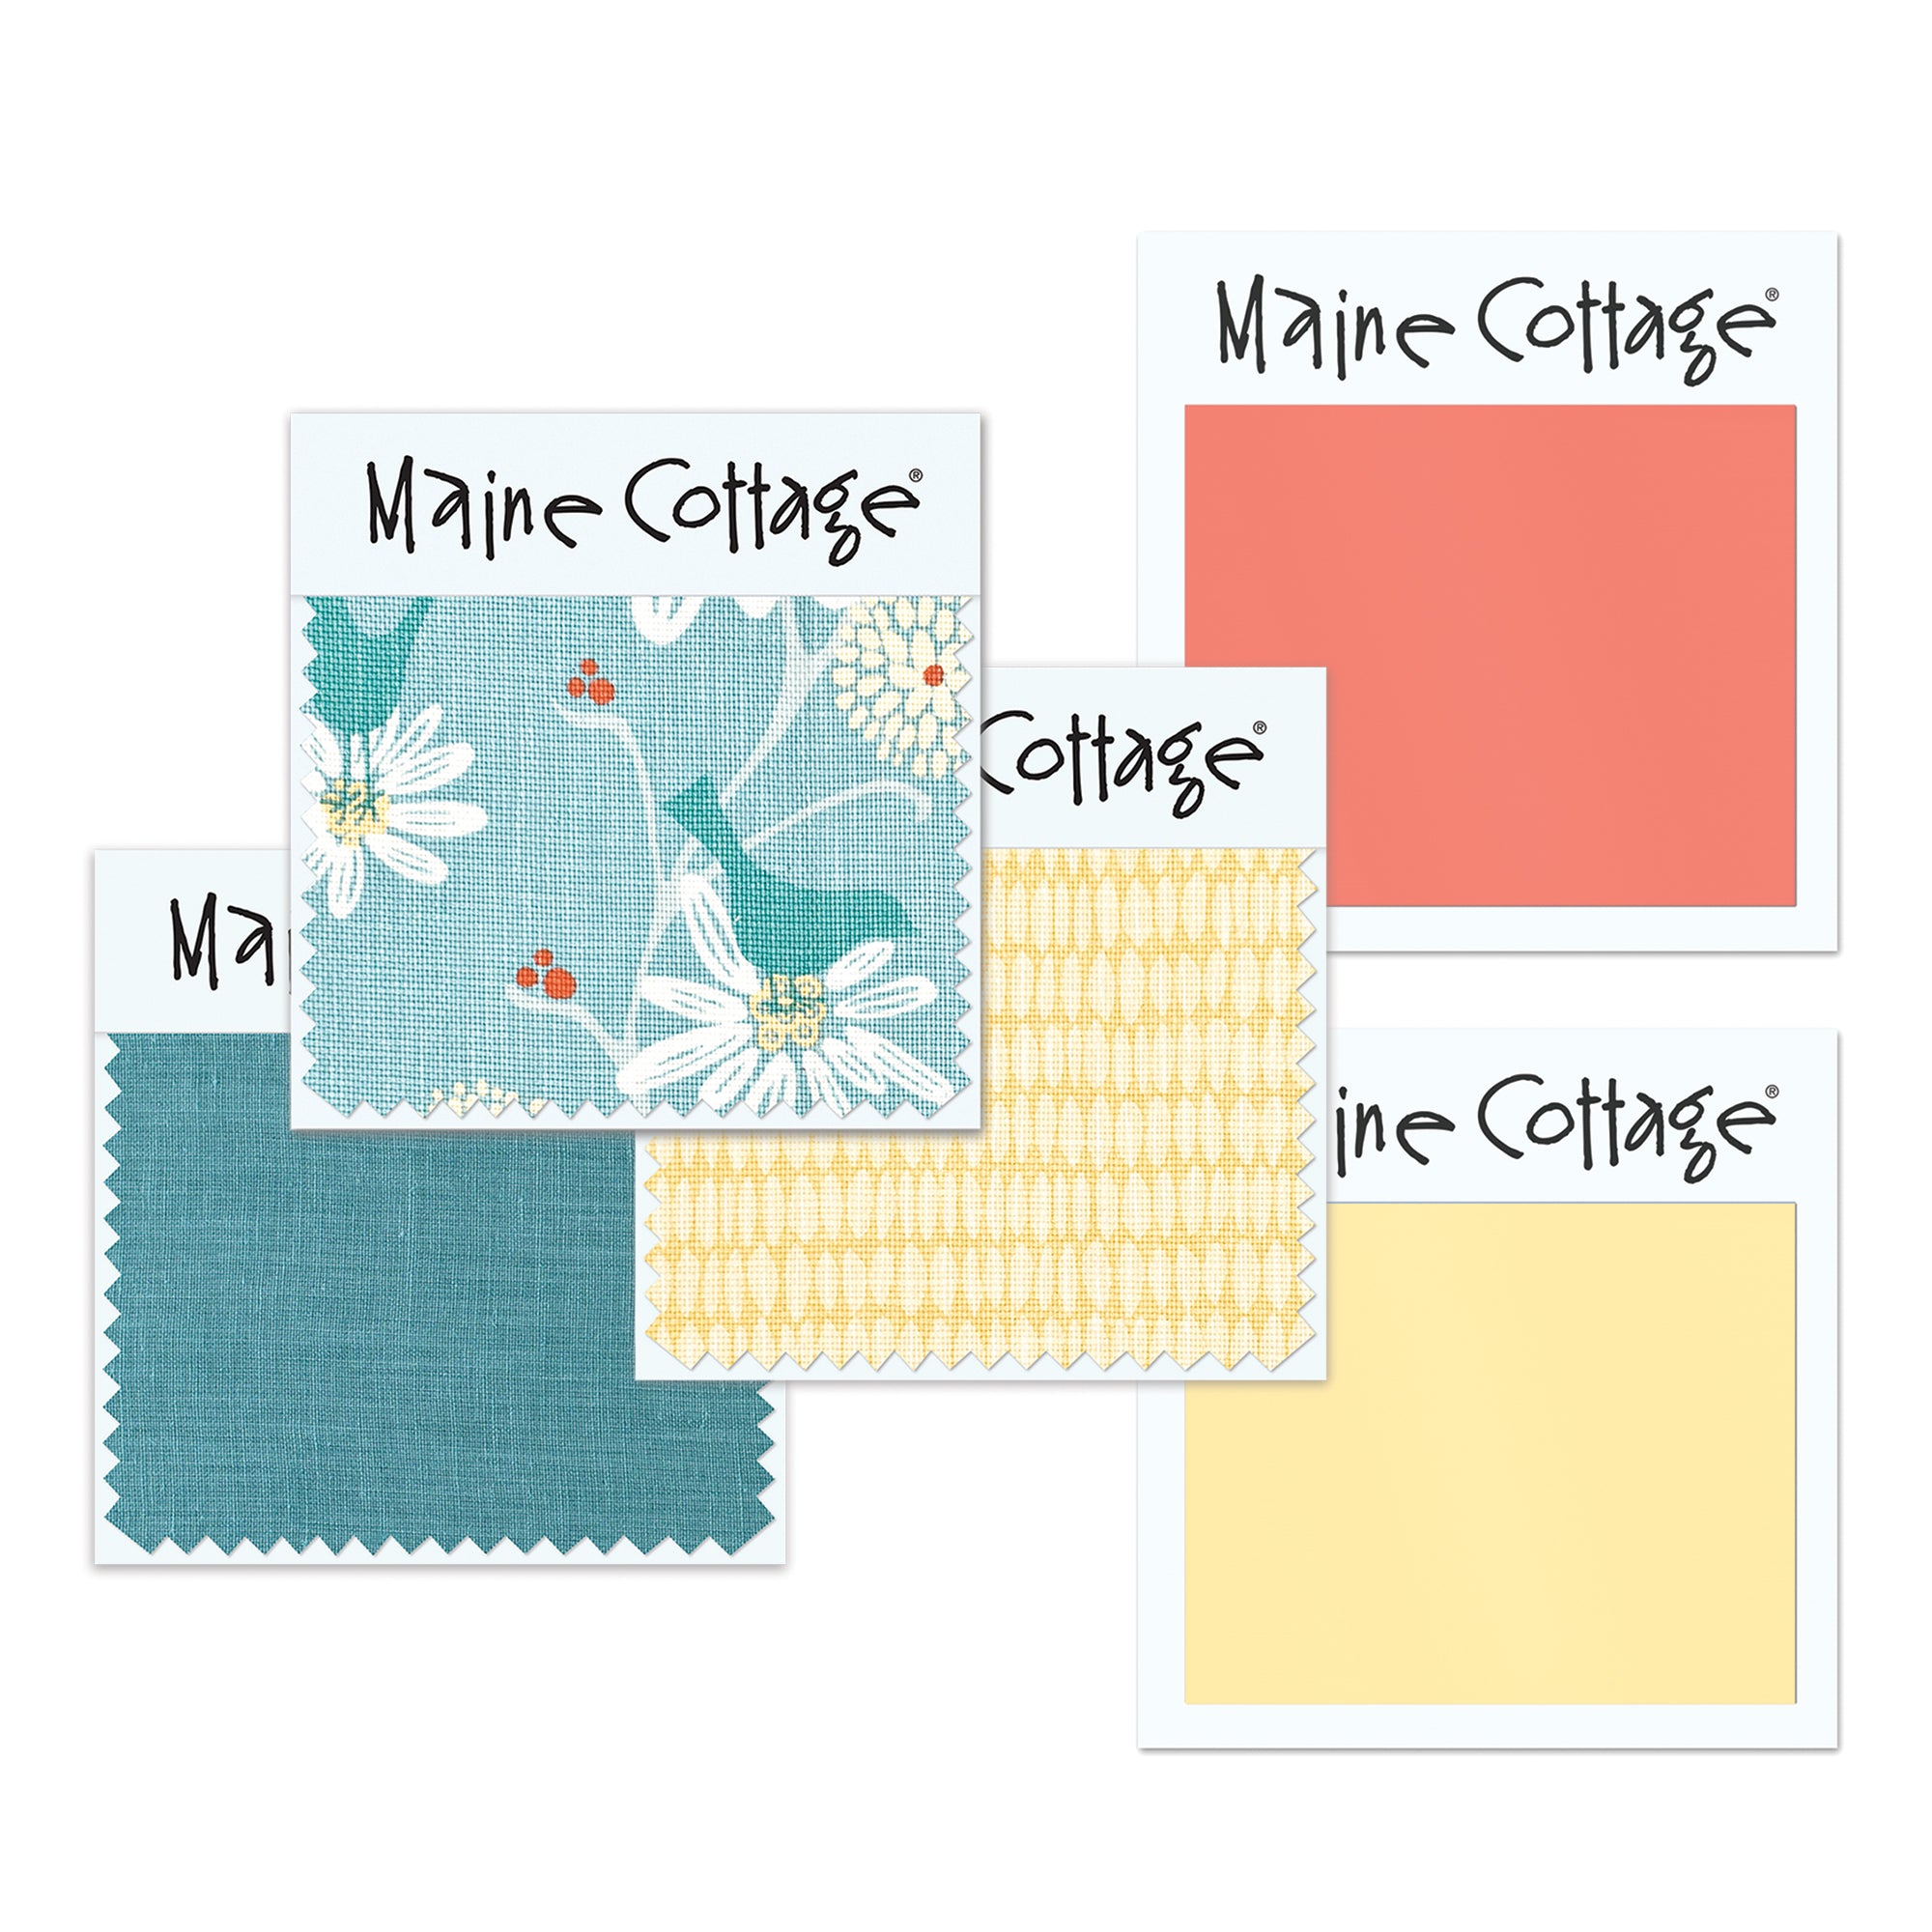 Maine Cottage Maine Cottage Color Consultation | Adding Color to Your Home 